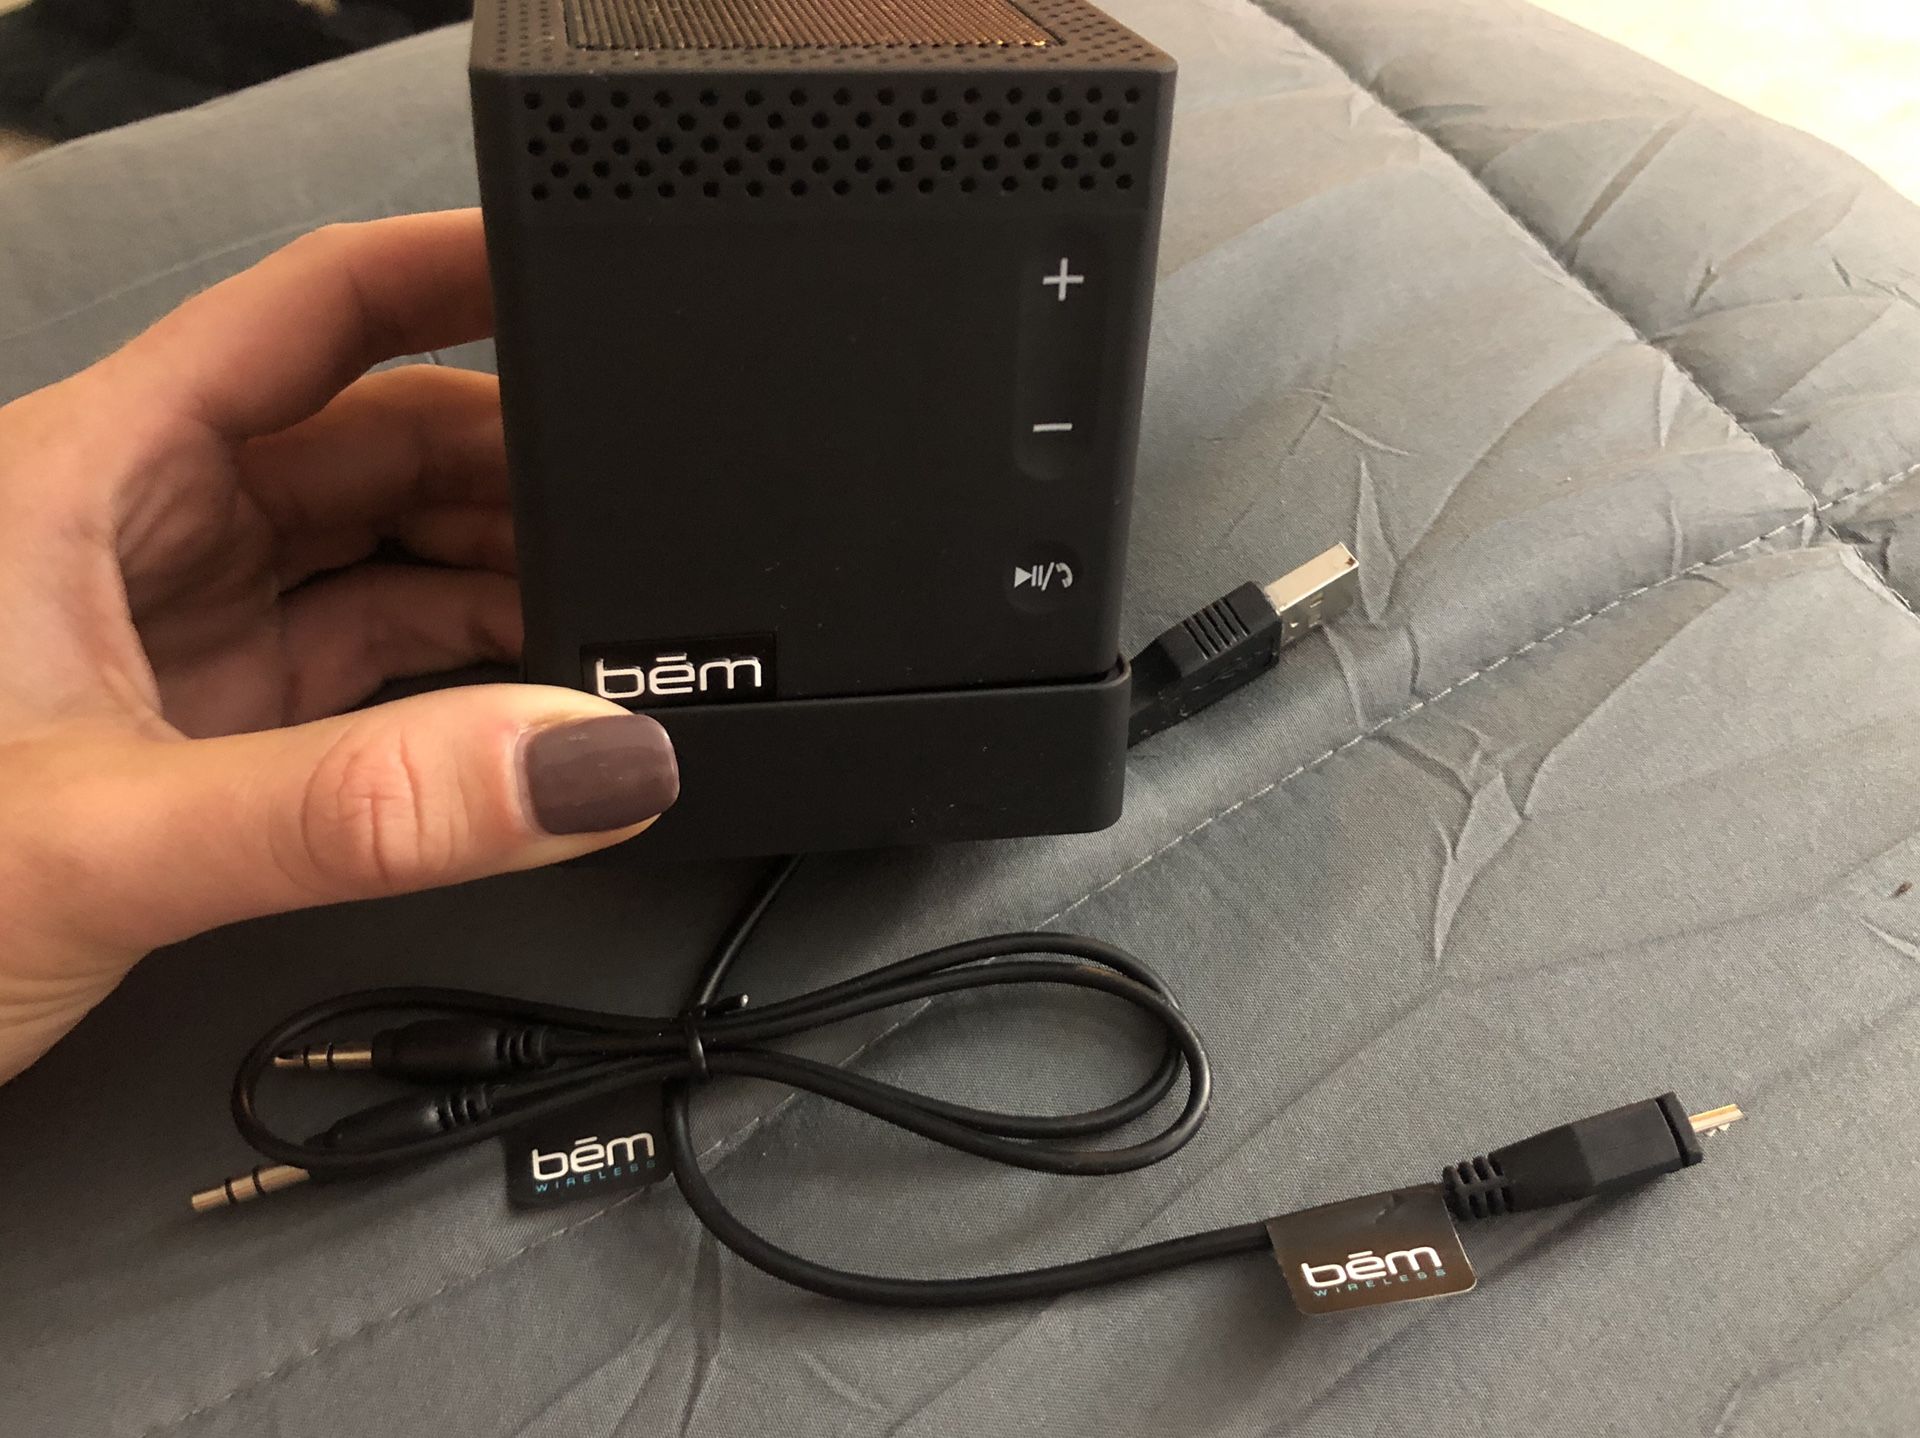 Bem Bluetooth Speaker with Original Charging and Aux Cords